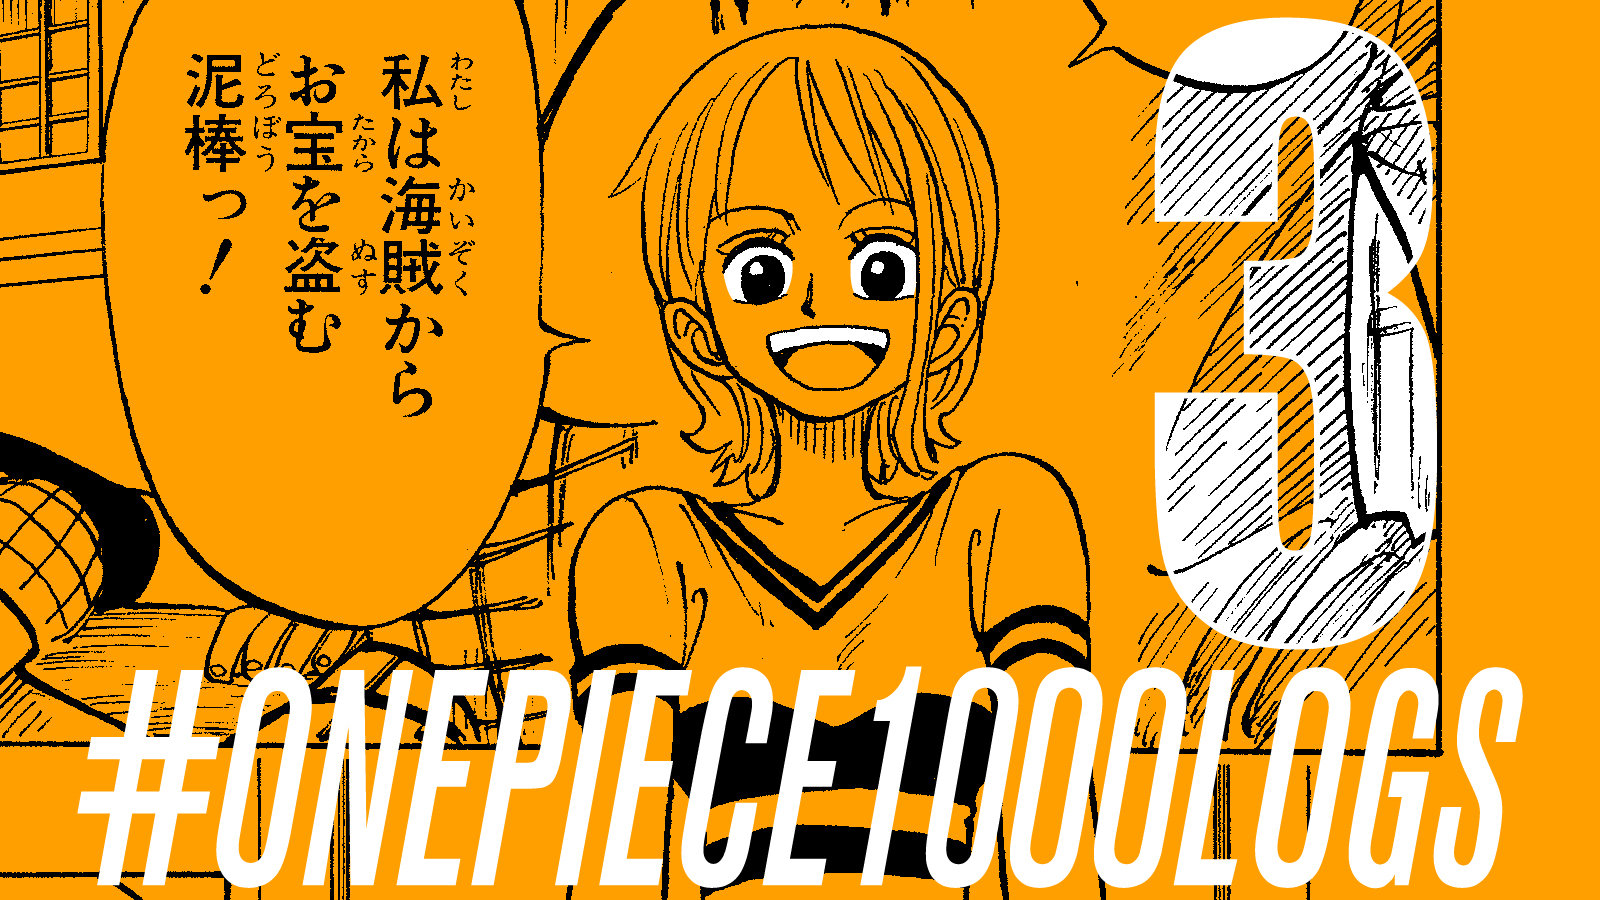 One Piece スタッフ 公式 Official 週刊少年ジャンプ連載 One Piece 1000話まであと 3話 Weekly Shonen Jump One Piece 3 Chapters To 1000 Onepiece1000logs カウントダウン Countdown 週刊少年ジャンプ52号発売 T Co Tb56mfxz86